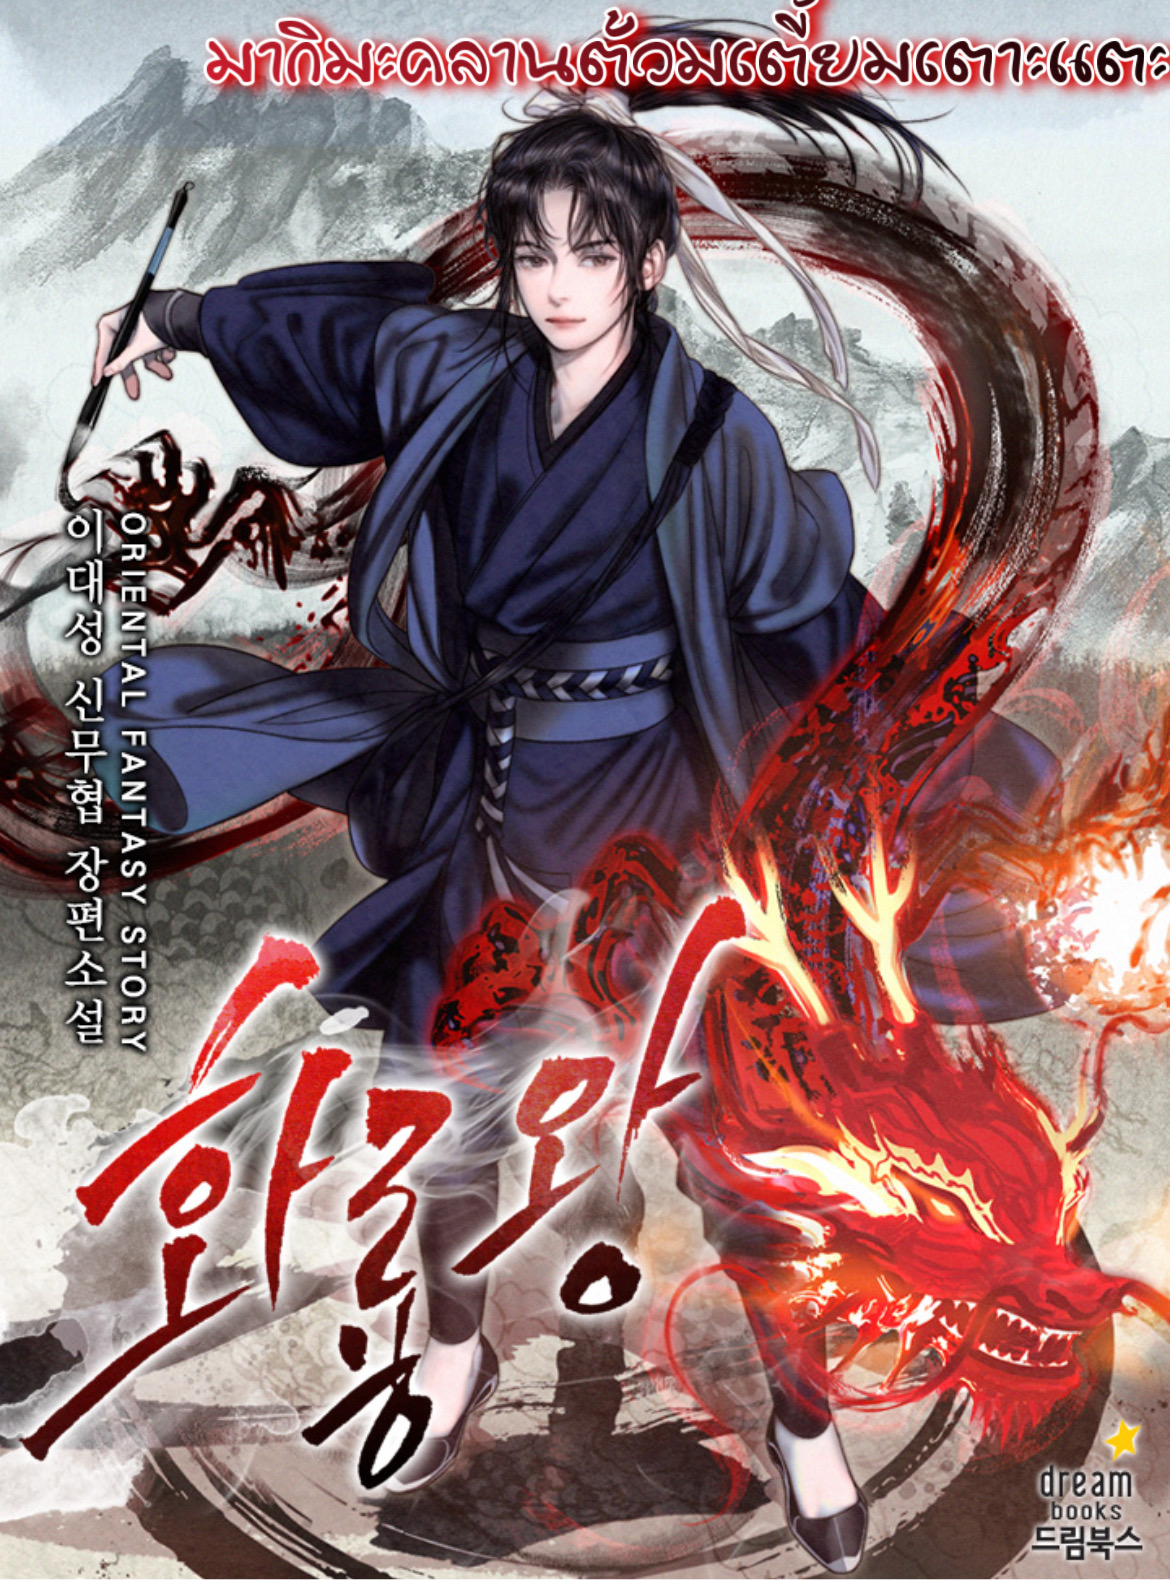 King of Fire Dragon 25 (5)